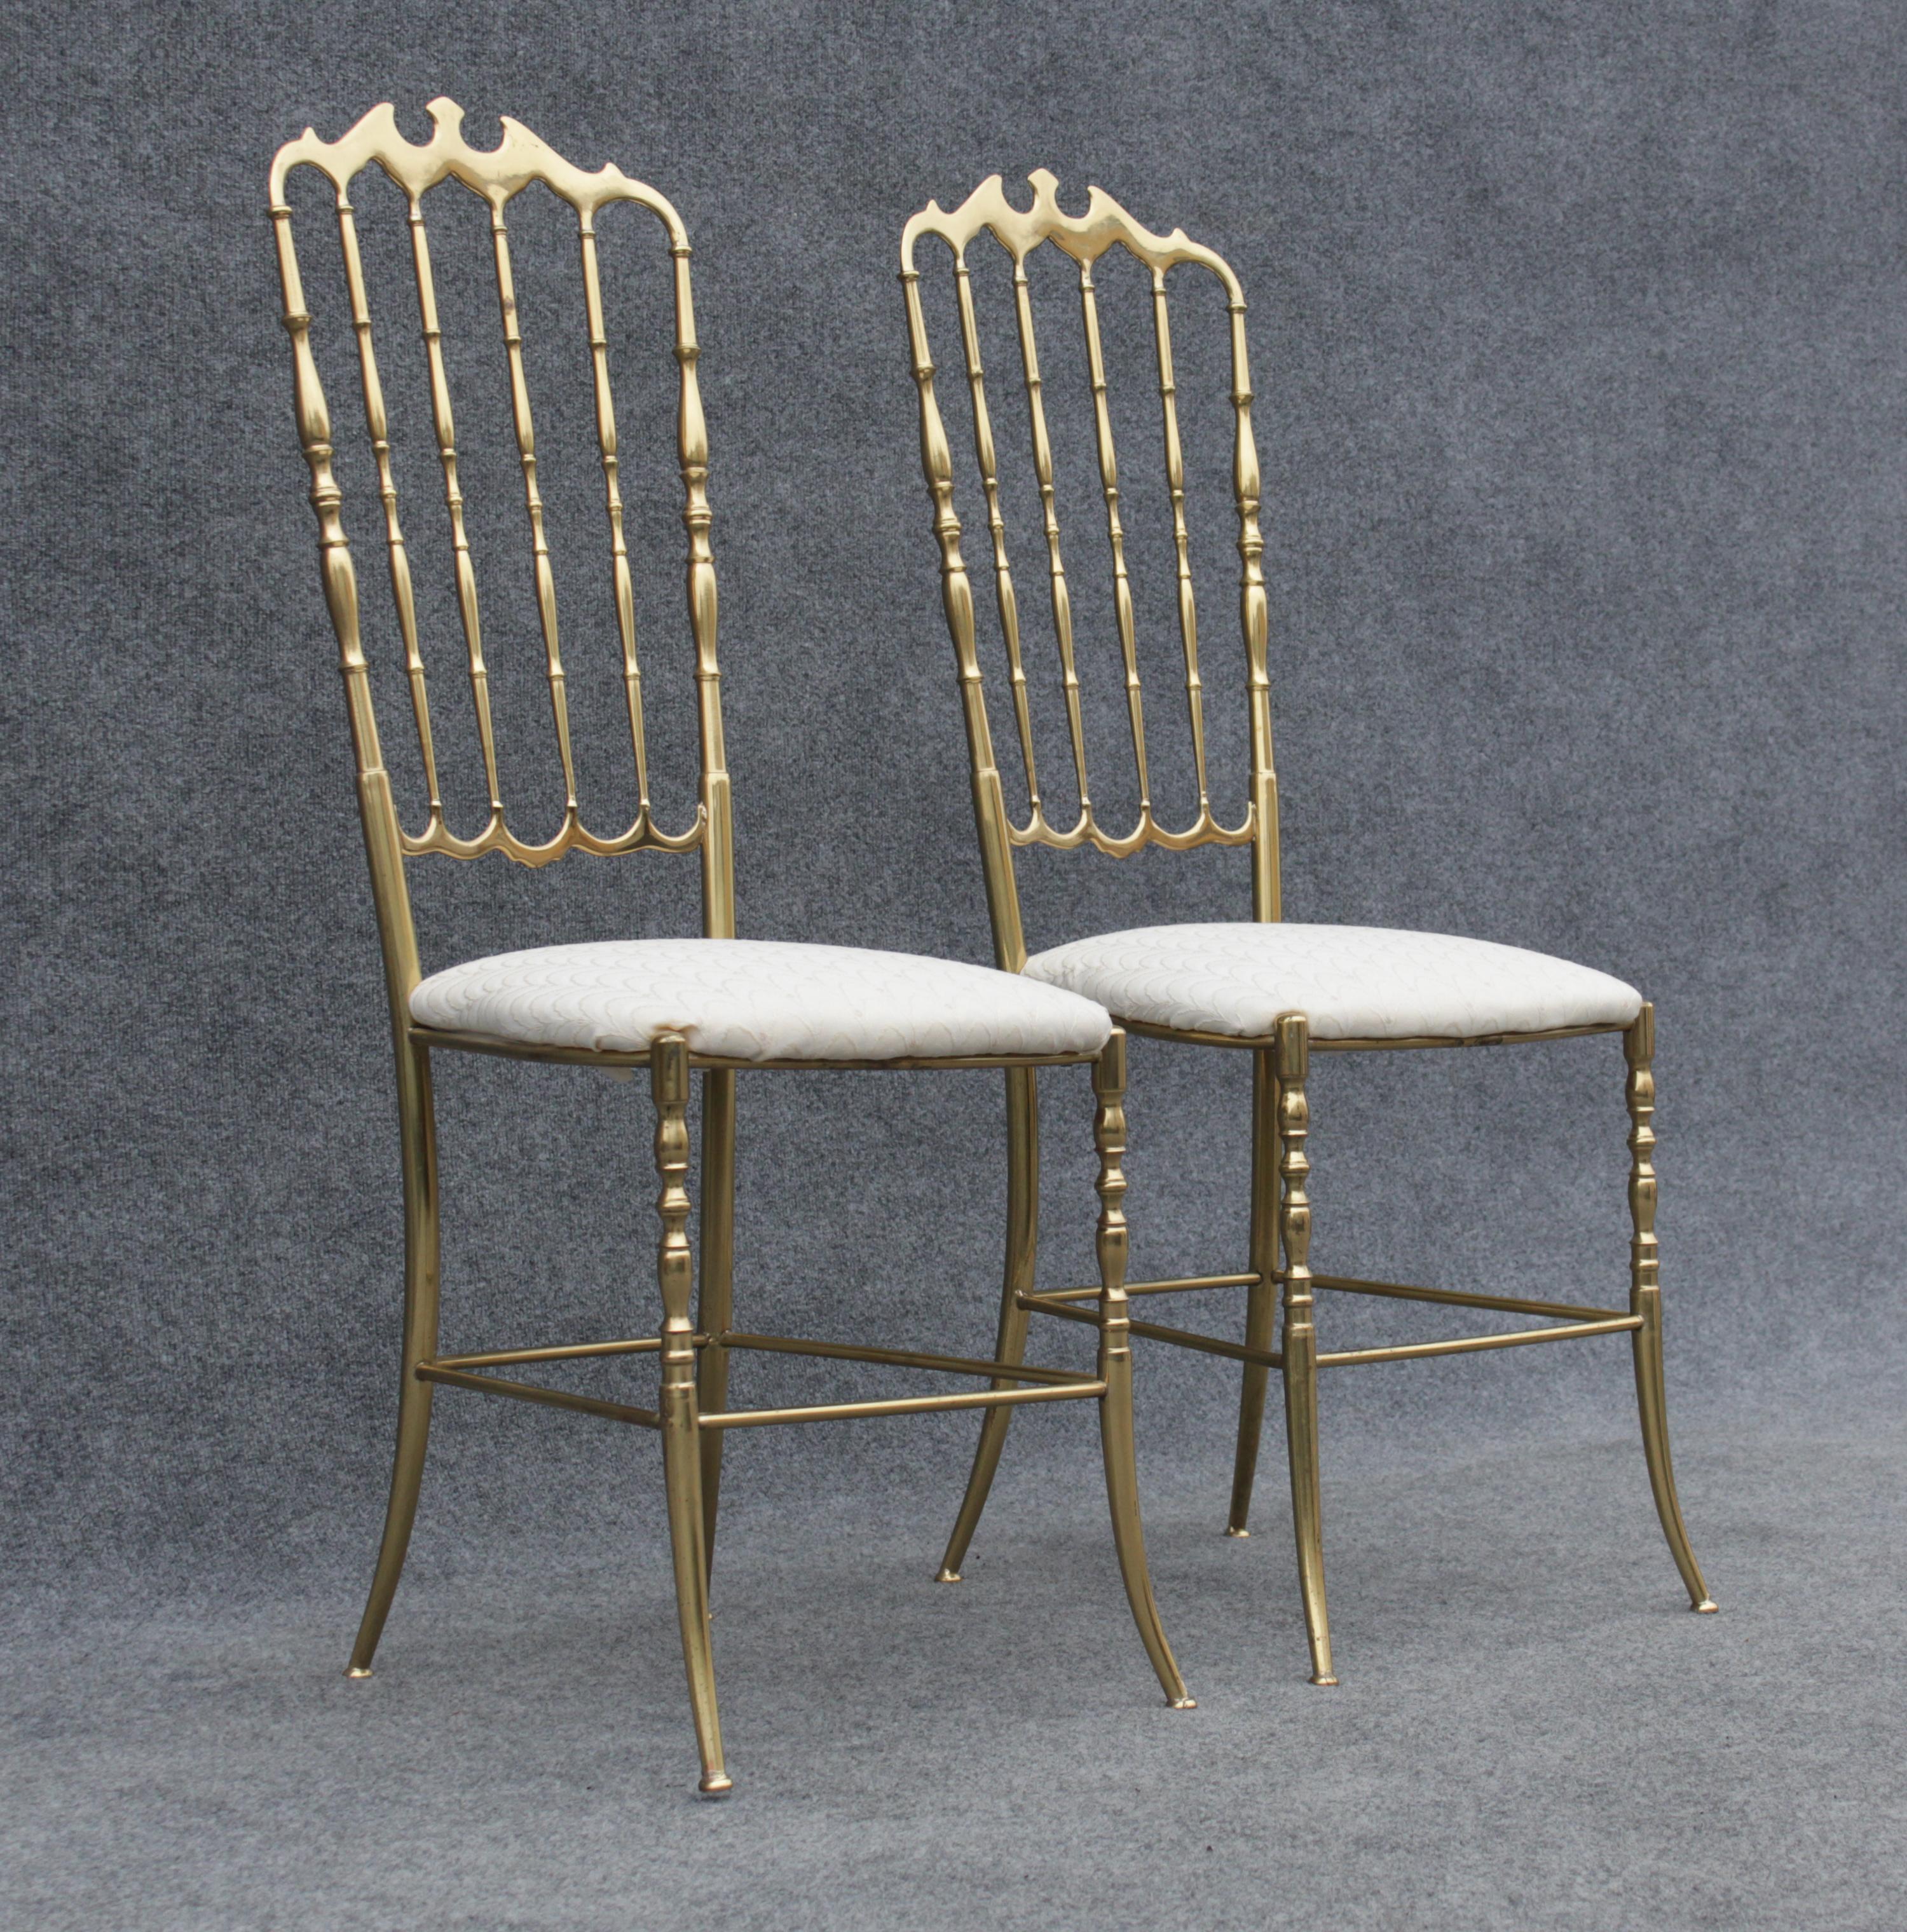 Mid-20th Century Pair of Solid Brass & White Upholstered Dining or Side Chairs by Chiavari Italy For Sale